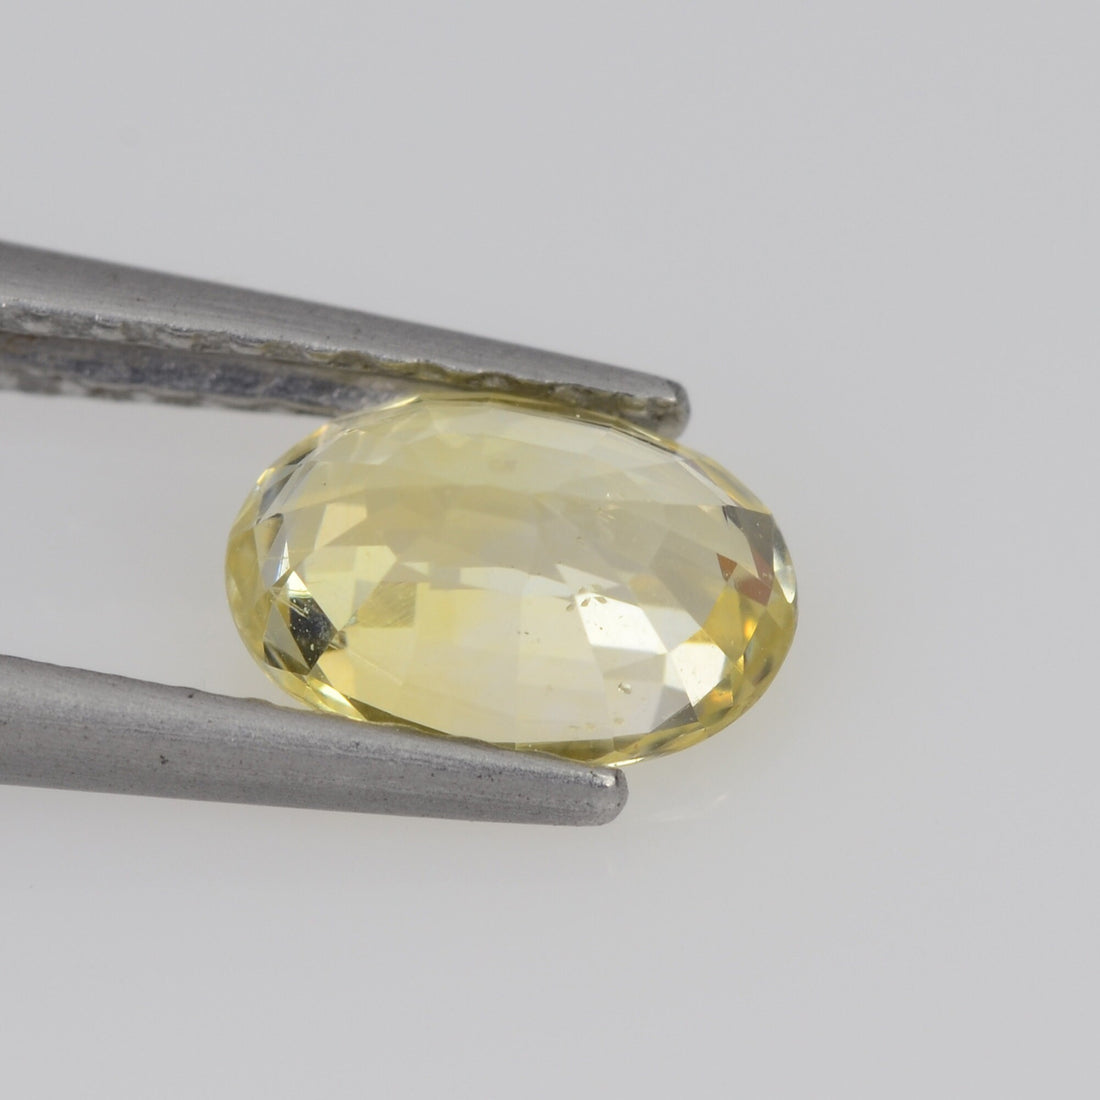 0.92 cts Natural Yellow Sapphire Loose Gemstone Oval Cut